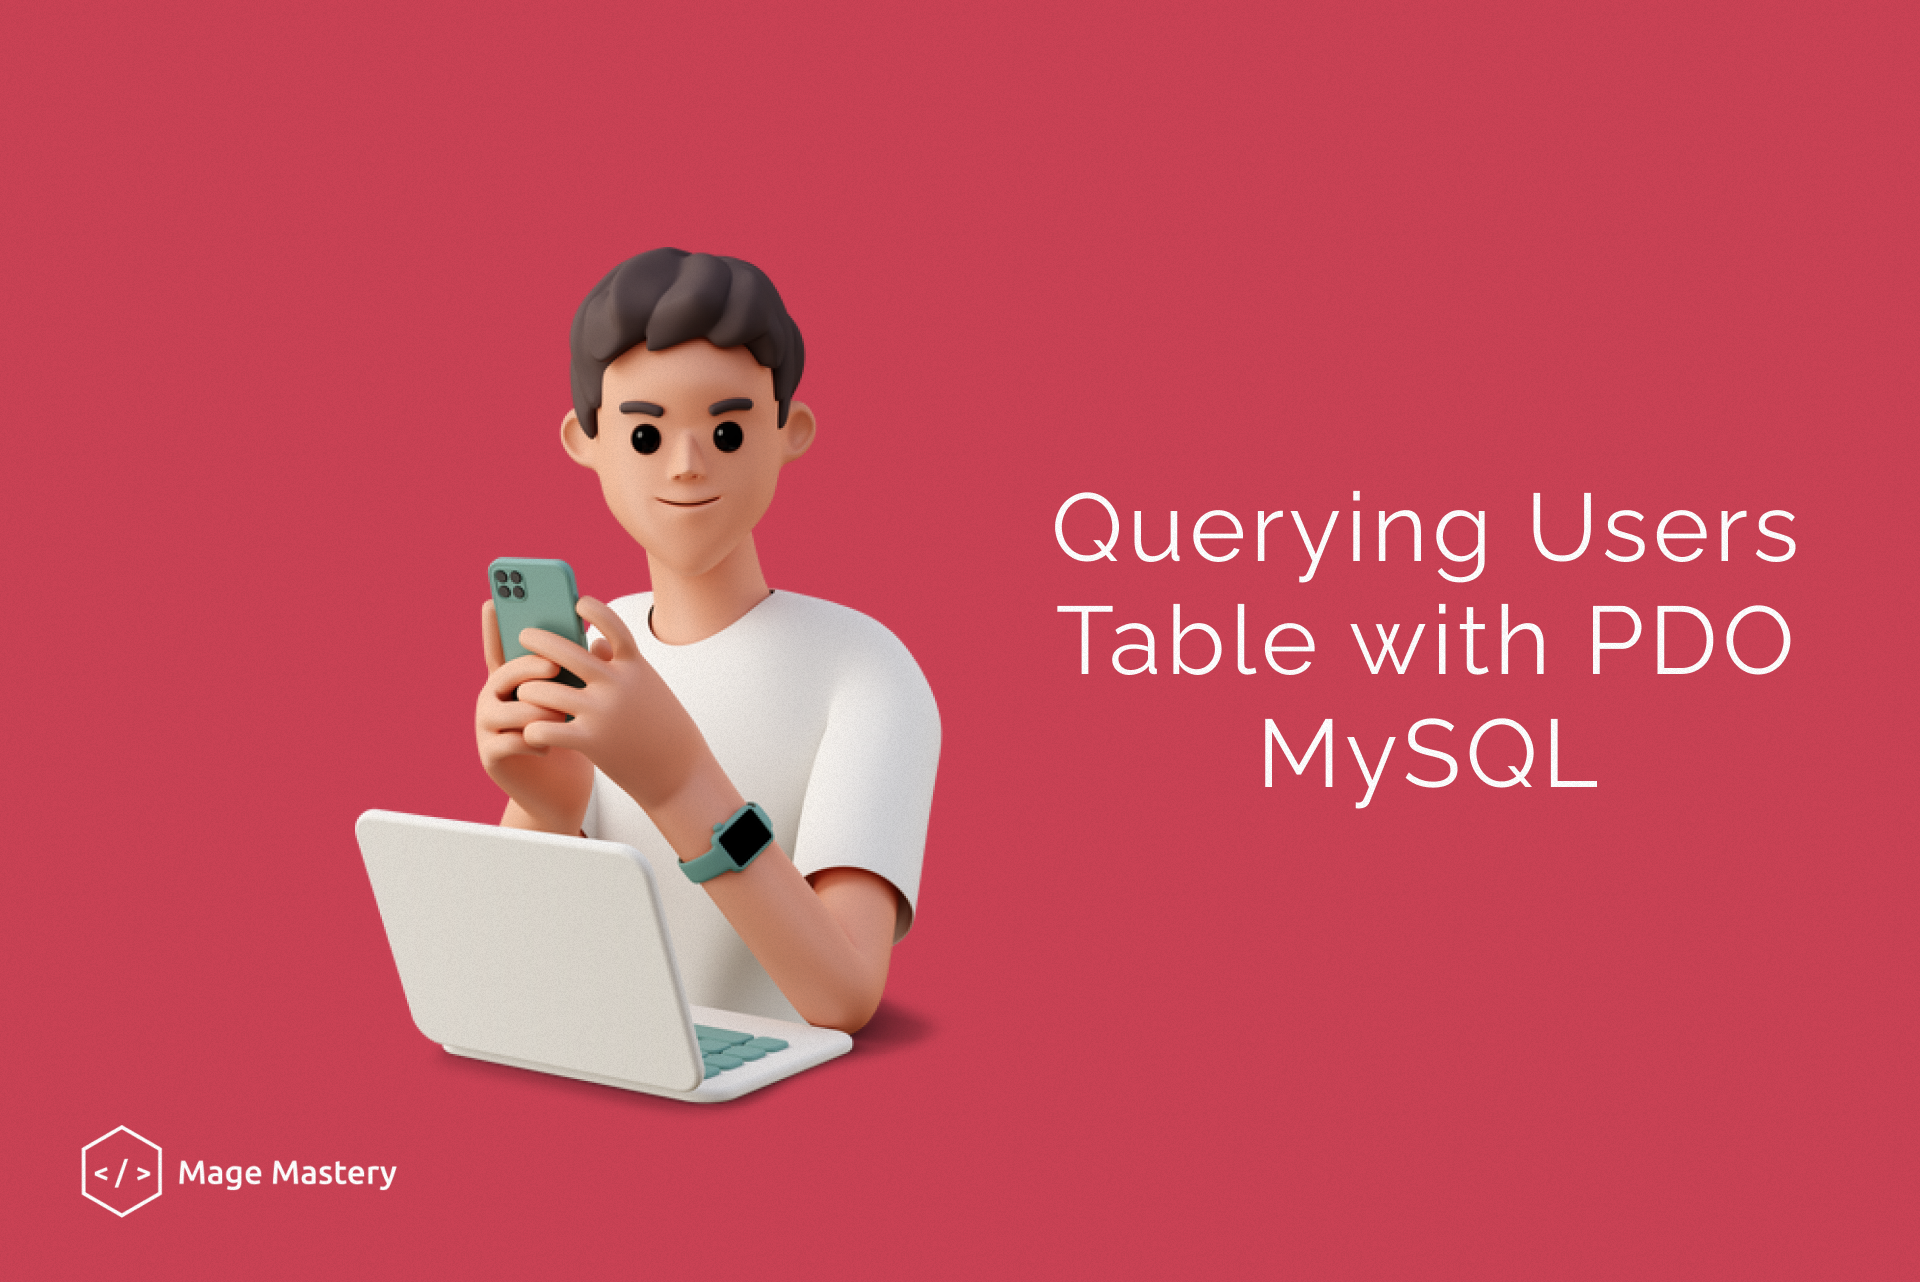 Querying Users Table with PDO MySQL